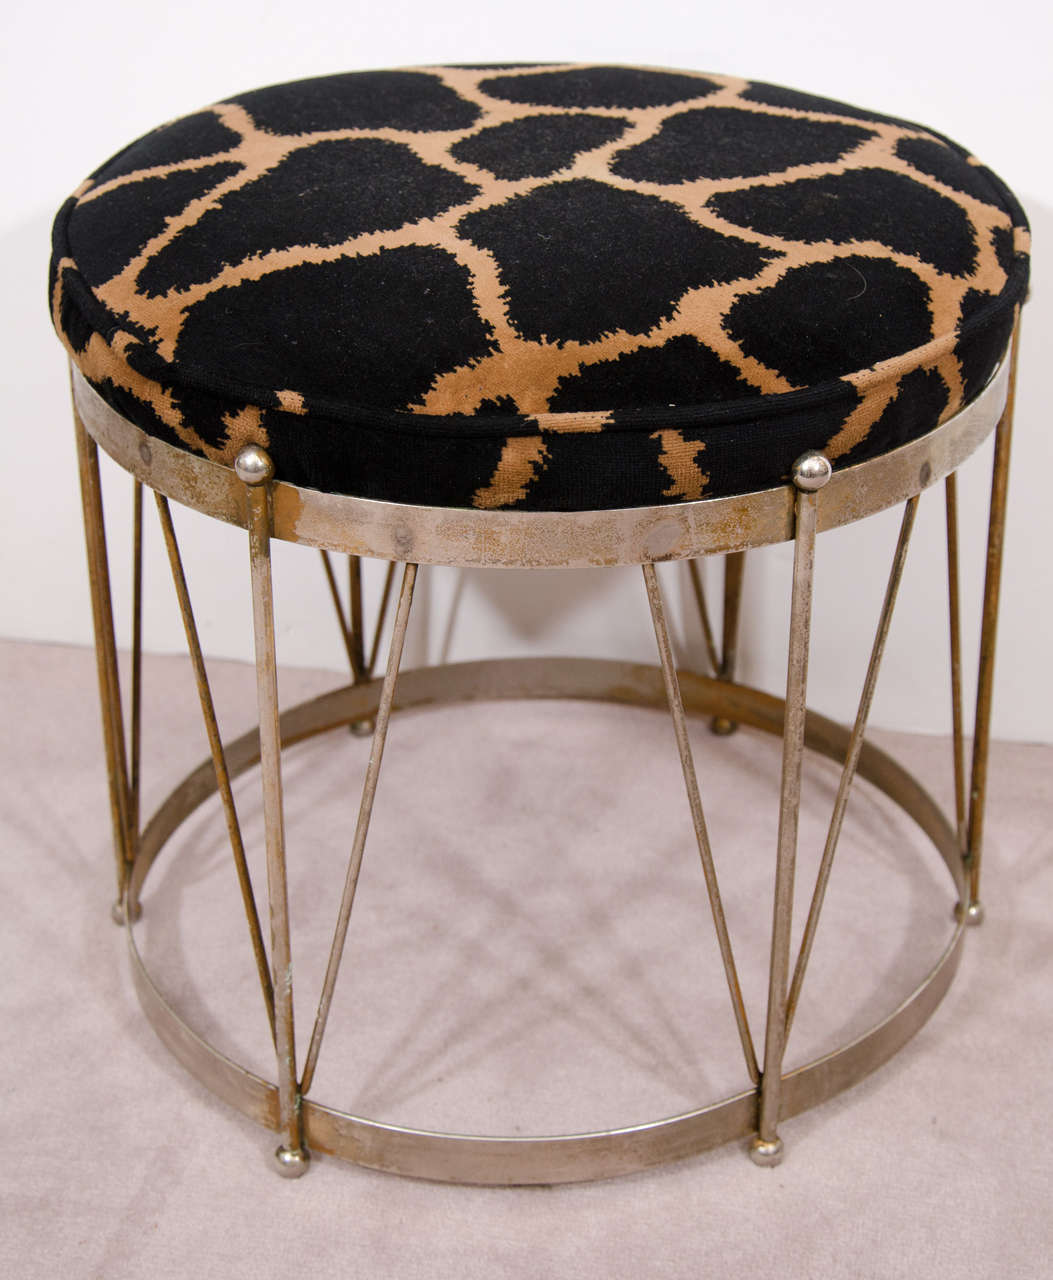 A vintage plated metal drum style stool with black and brown animal print upholstery.

Good vintage condition with age appropriate patina. Some wear to chrome finish.